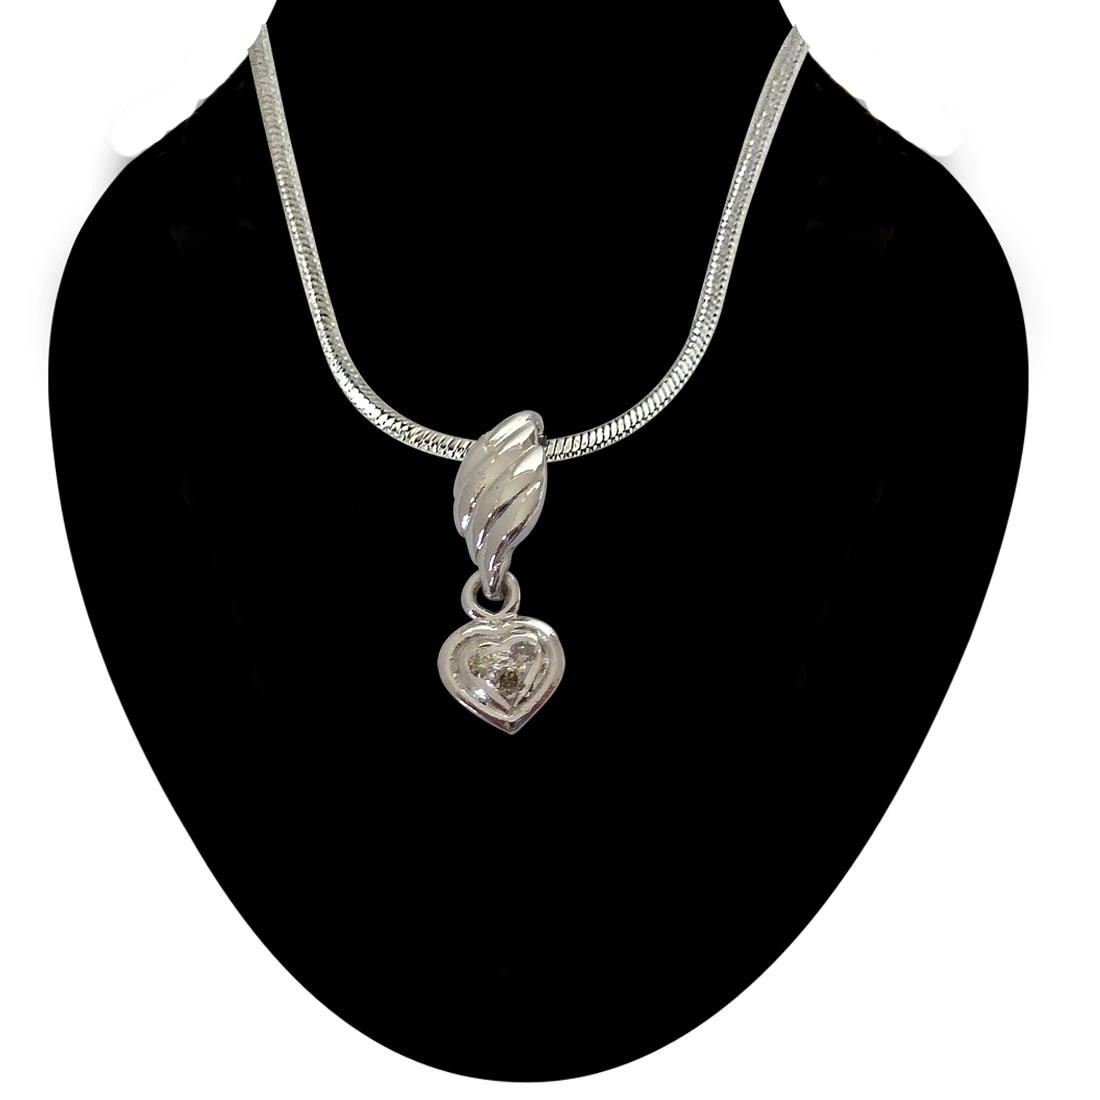 From The Heart - Real Diamond & Sterling Silver Pendant with 18 IN Chain (SDP125)